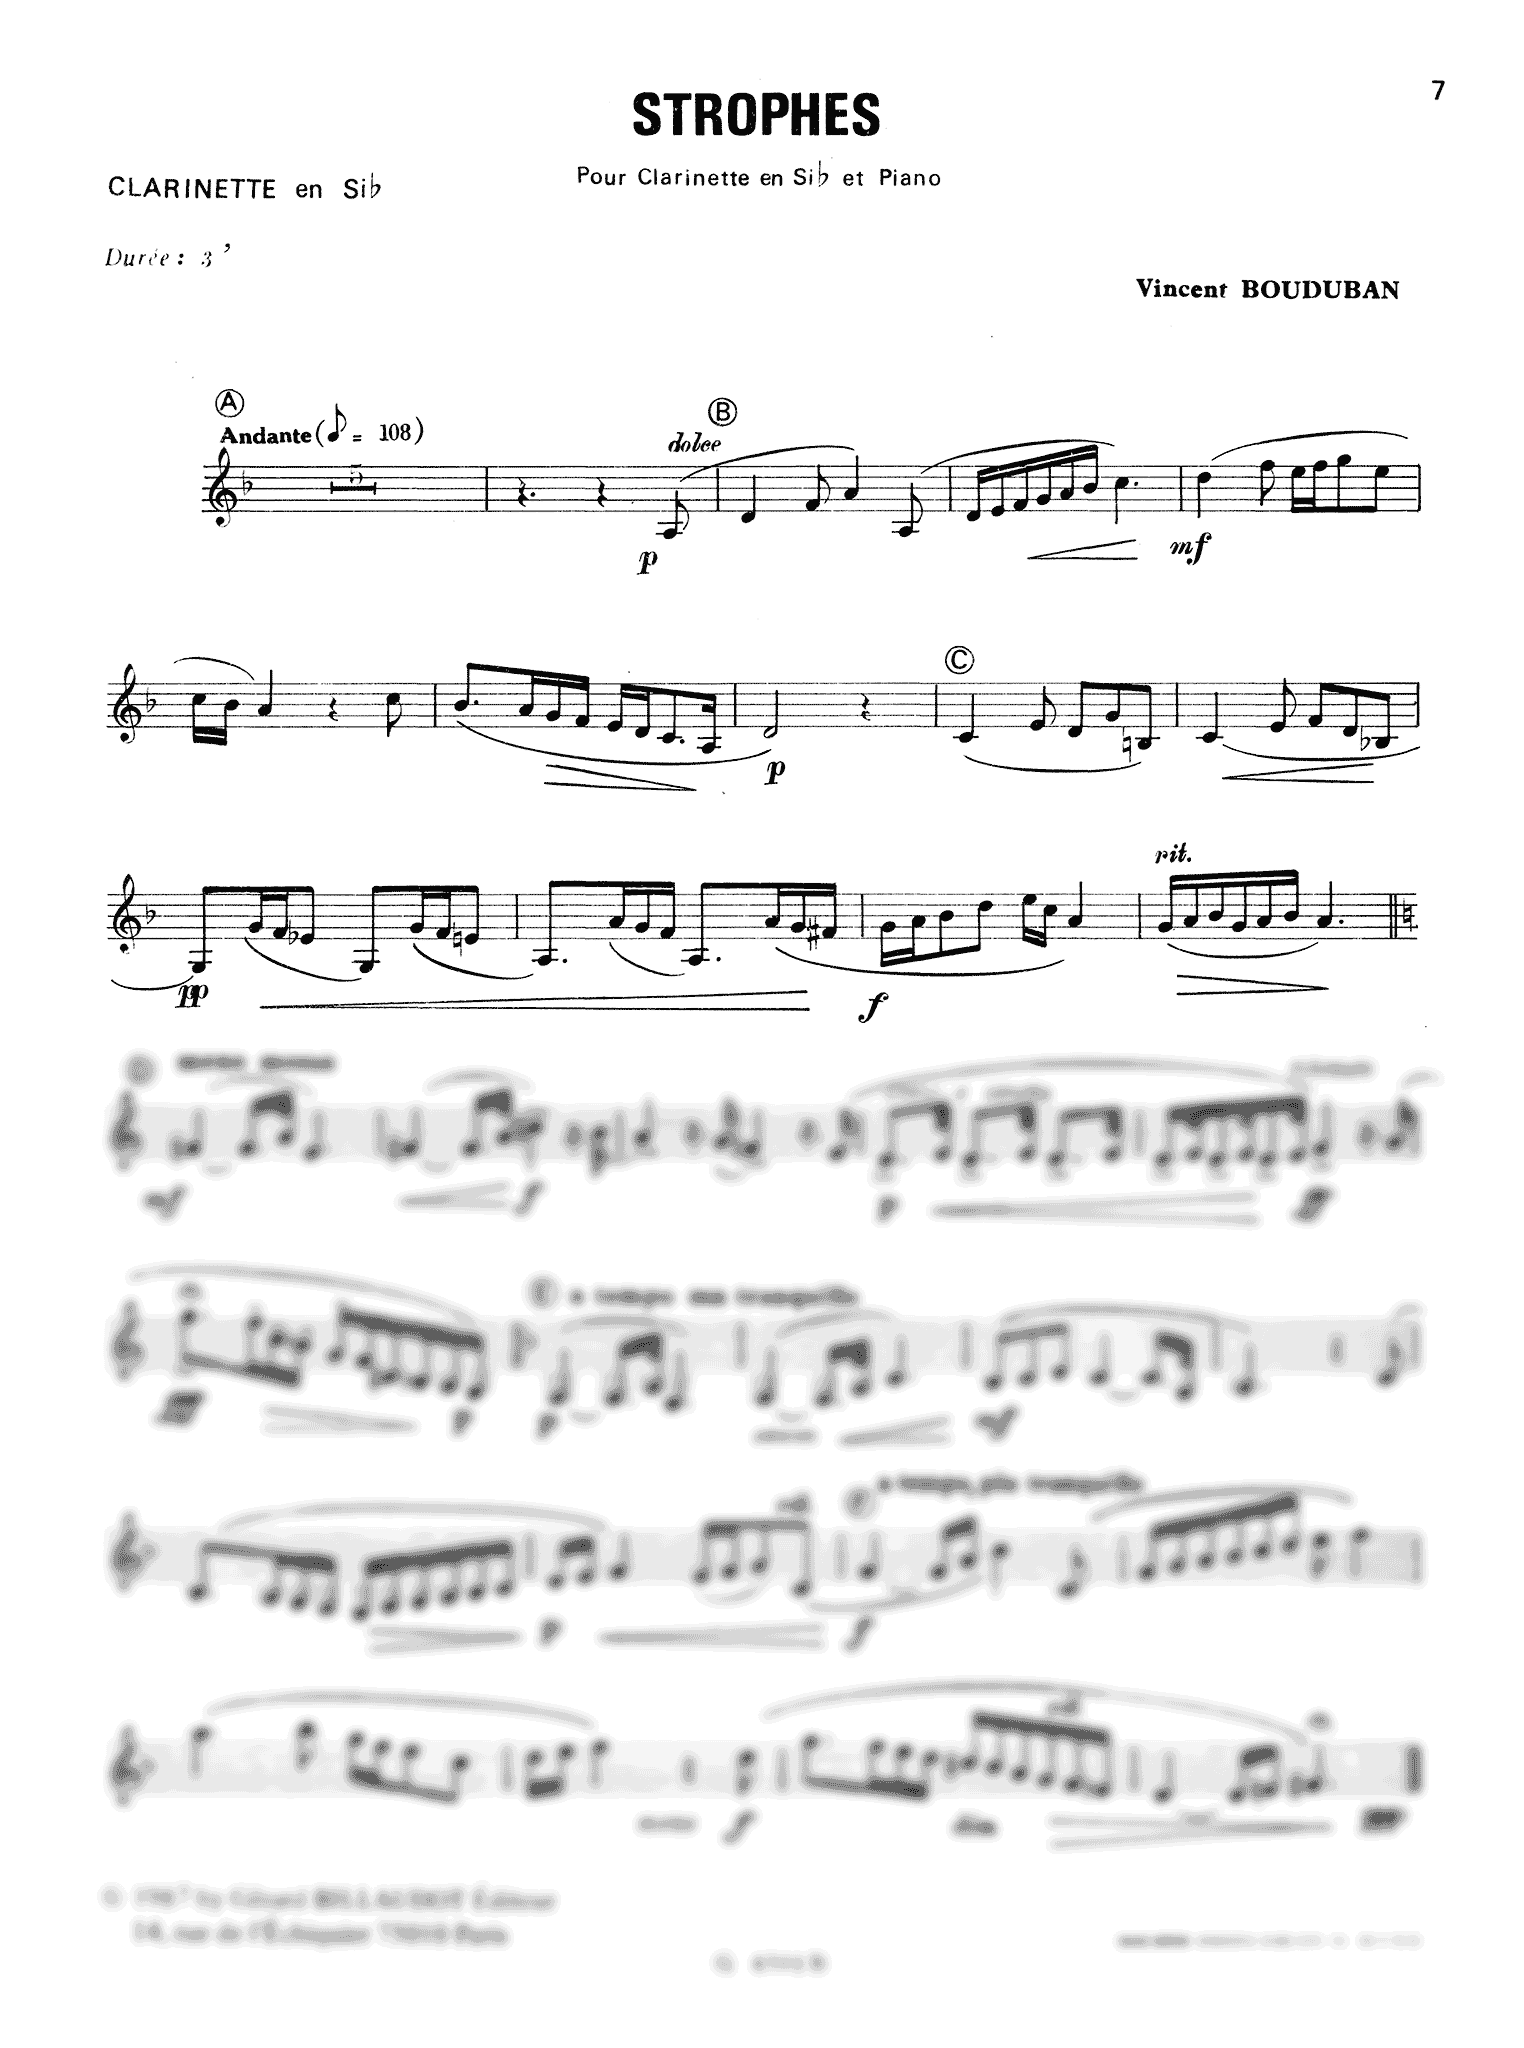 Bouduban Strophes clarinet and piano solo part